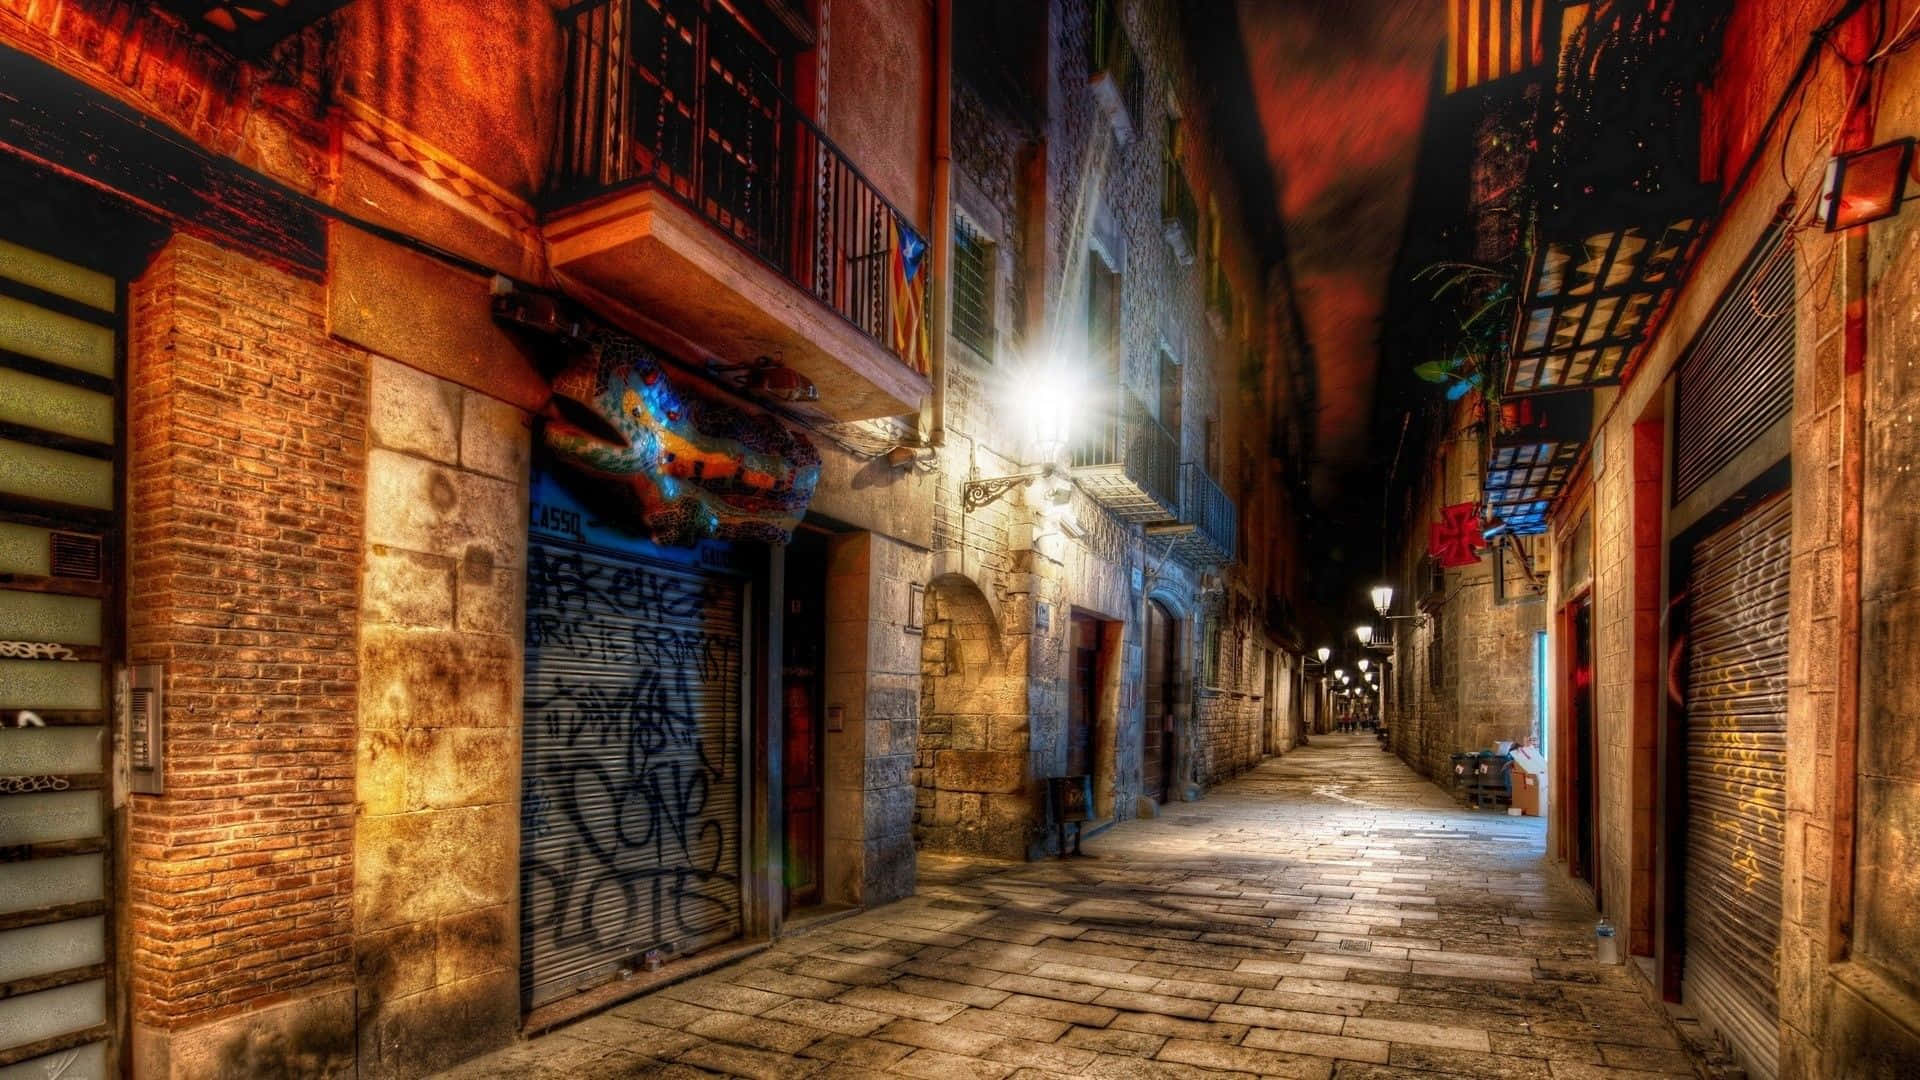 A Narrow Street With A Lamp And A Door